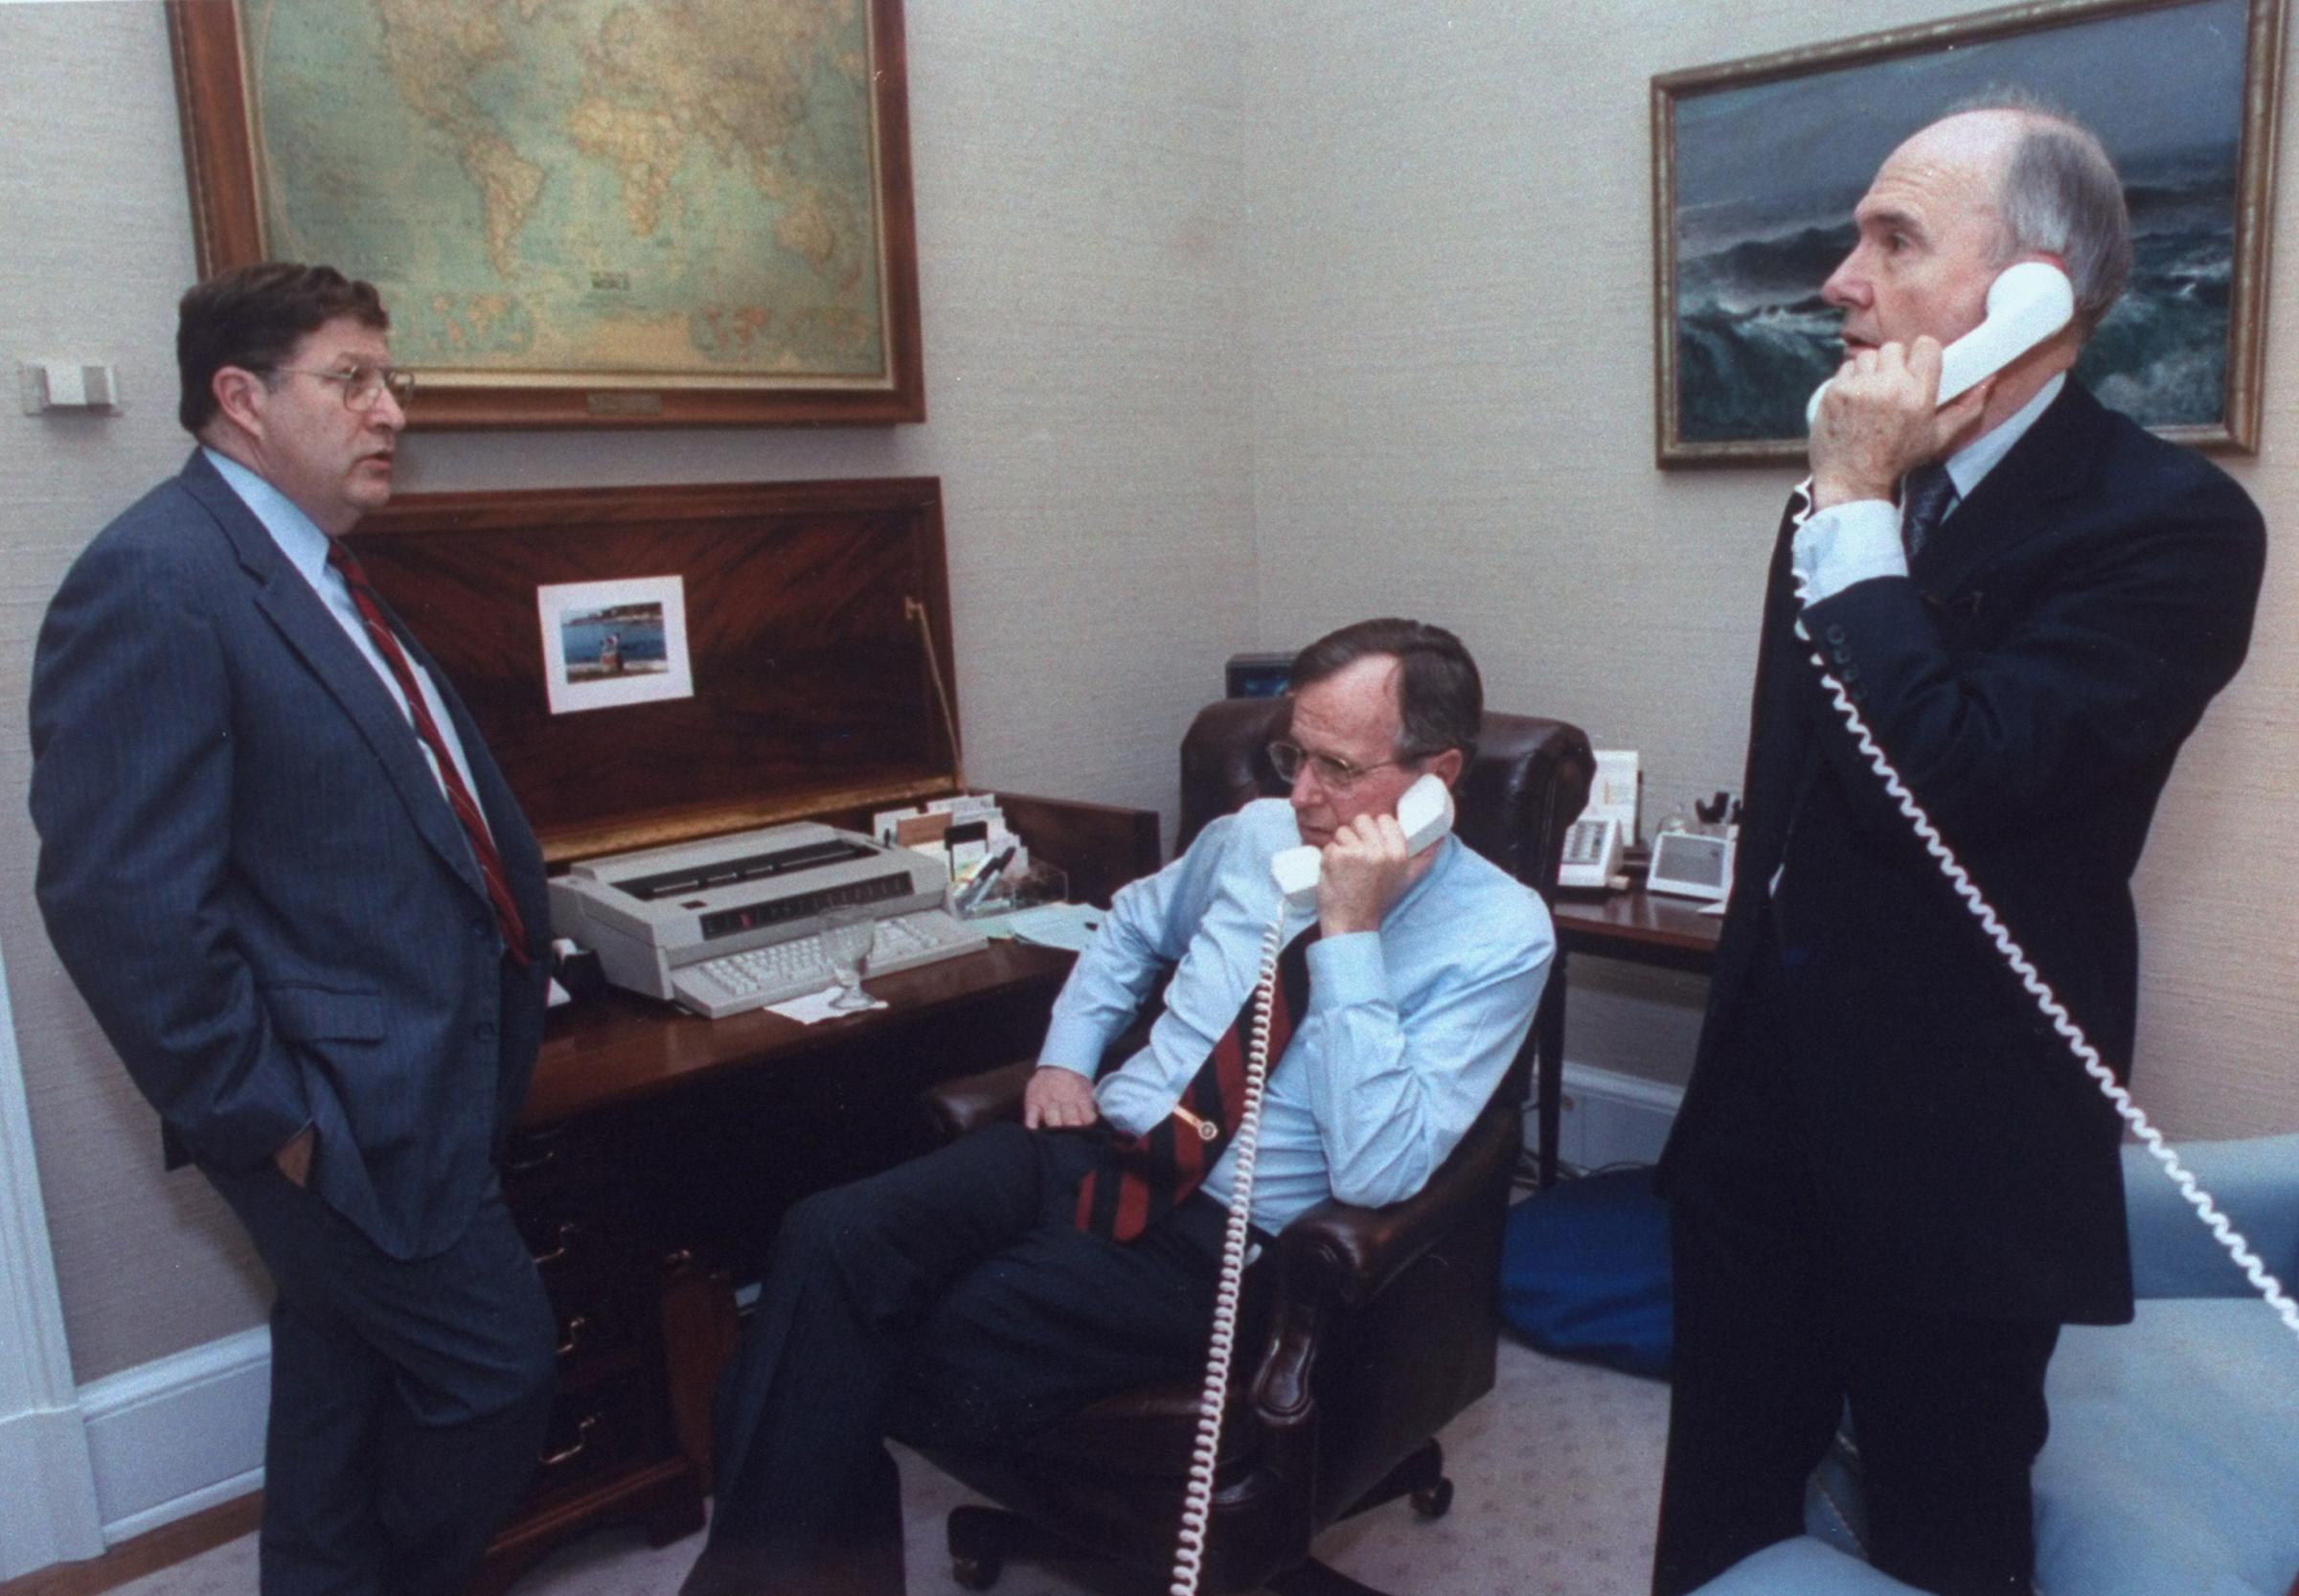 President George H.W. Bush on the phone with State Secretary Jim Baker during the gulf crisis, with White House Chief of Staff John Sununu &amp; National Security Council Adviser Brent Scowcroft, at the White House in Washington on January 16, 1991.